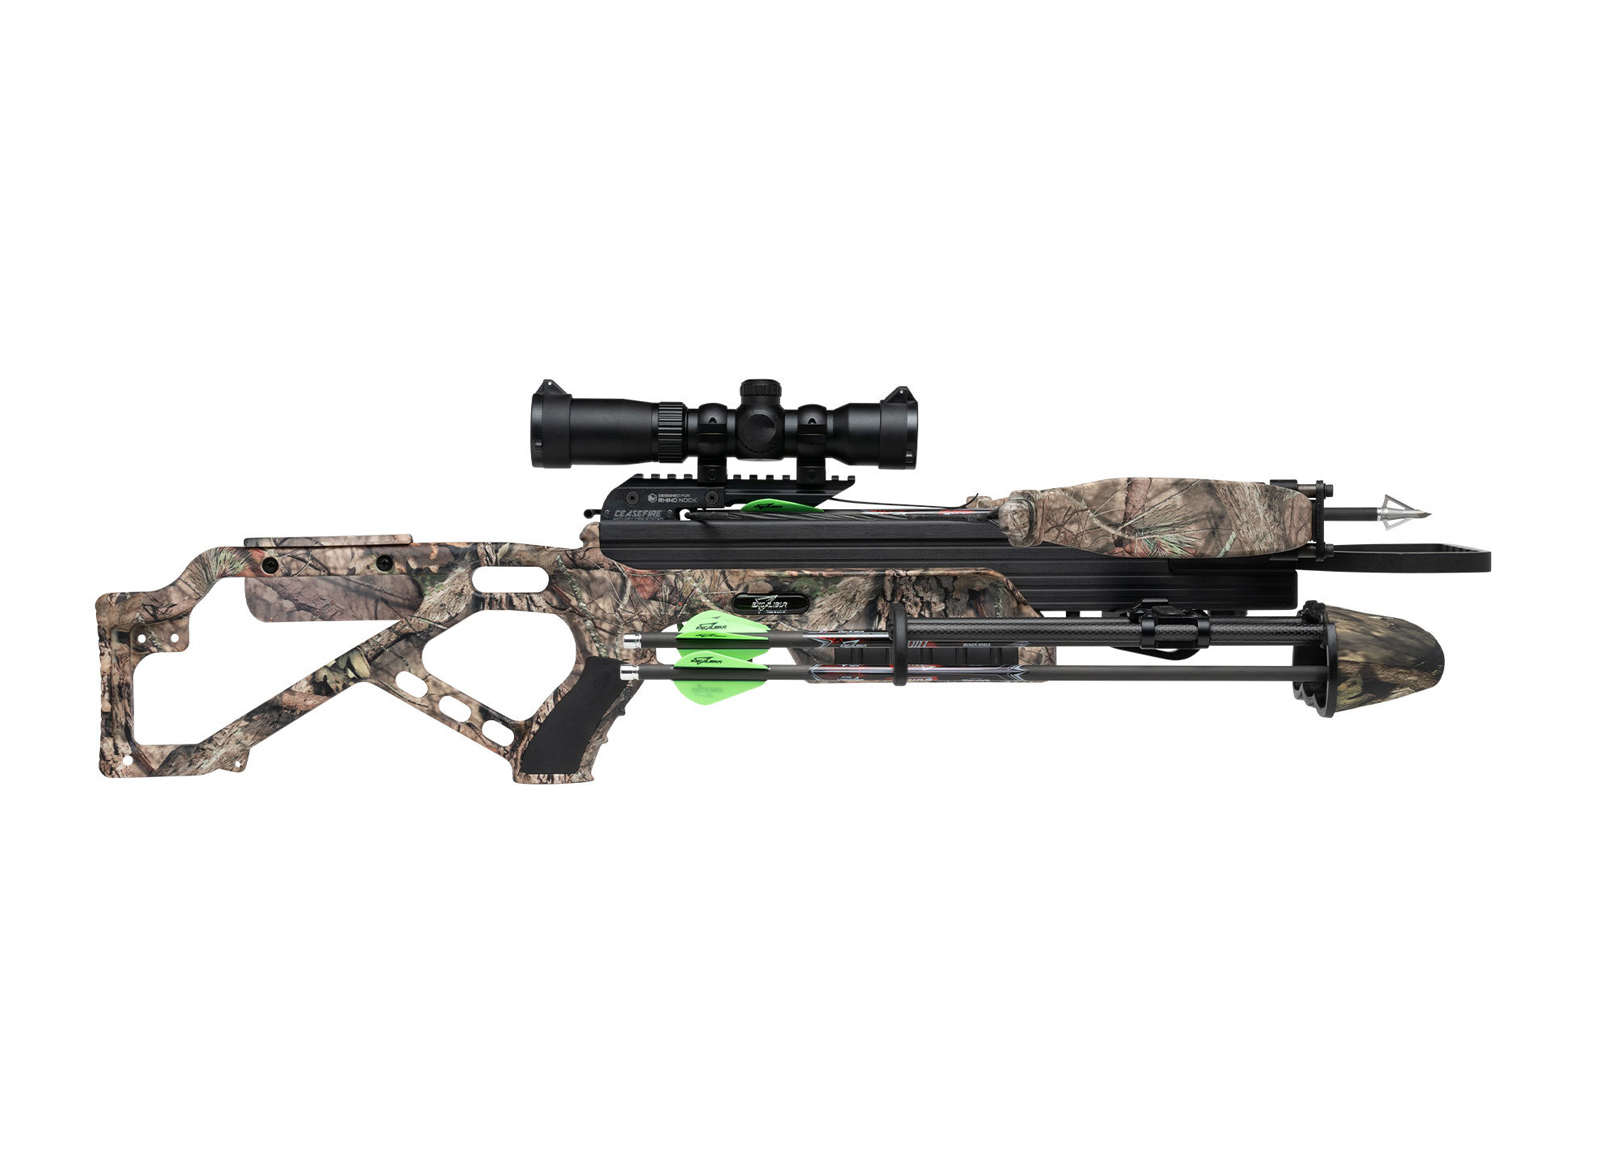 EXCALIBUR CROSSBOW MICRO 380 MOSSY OAK PACKAGE 2022